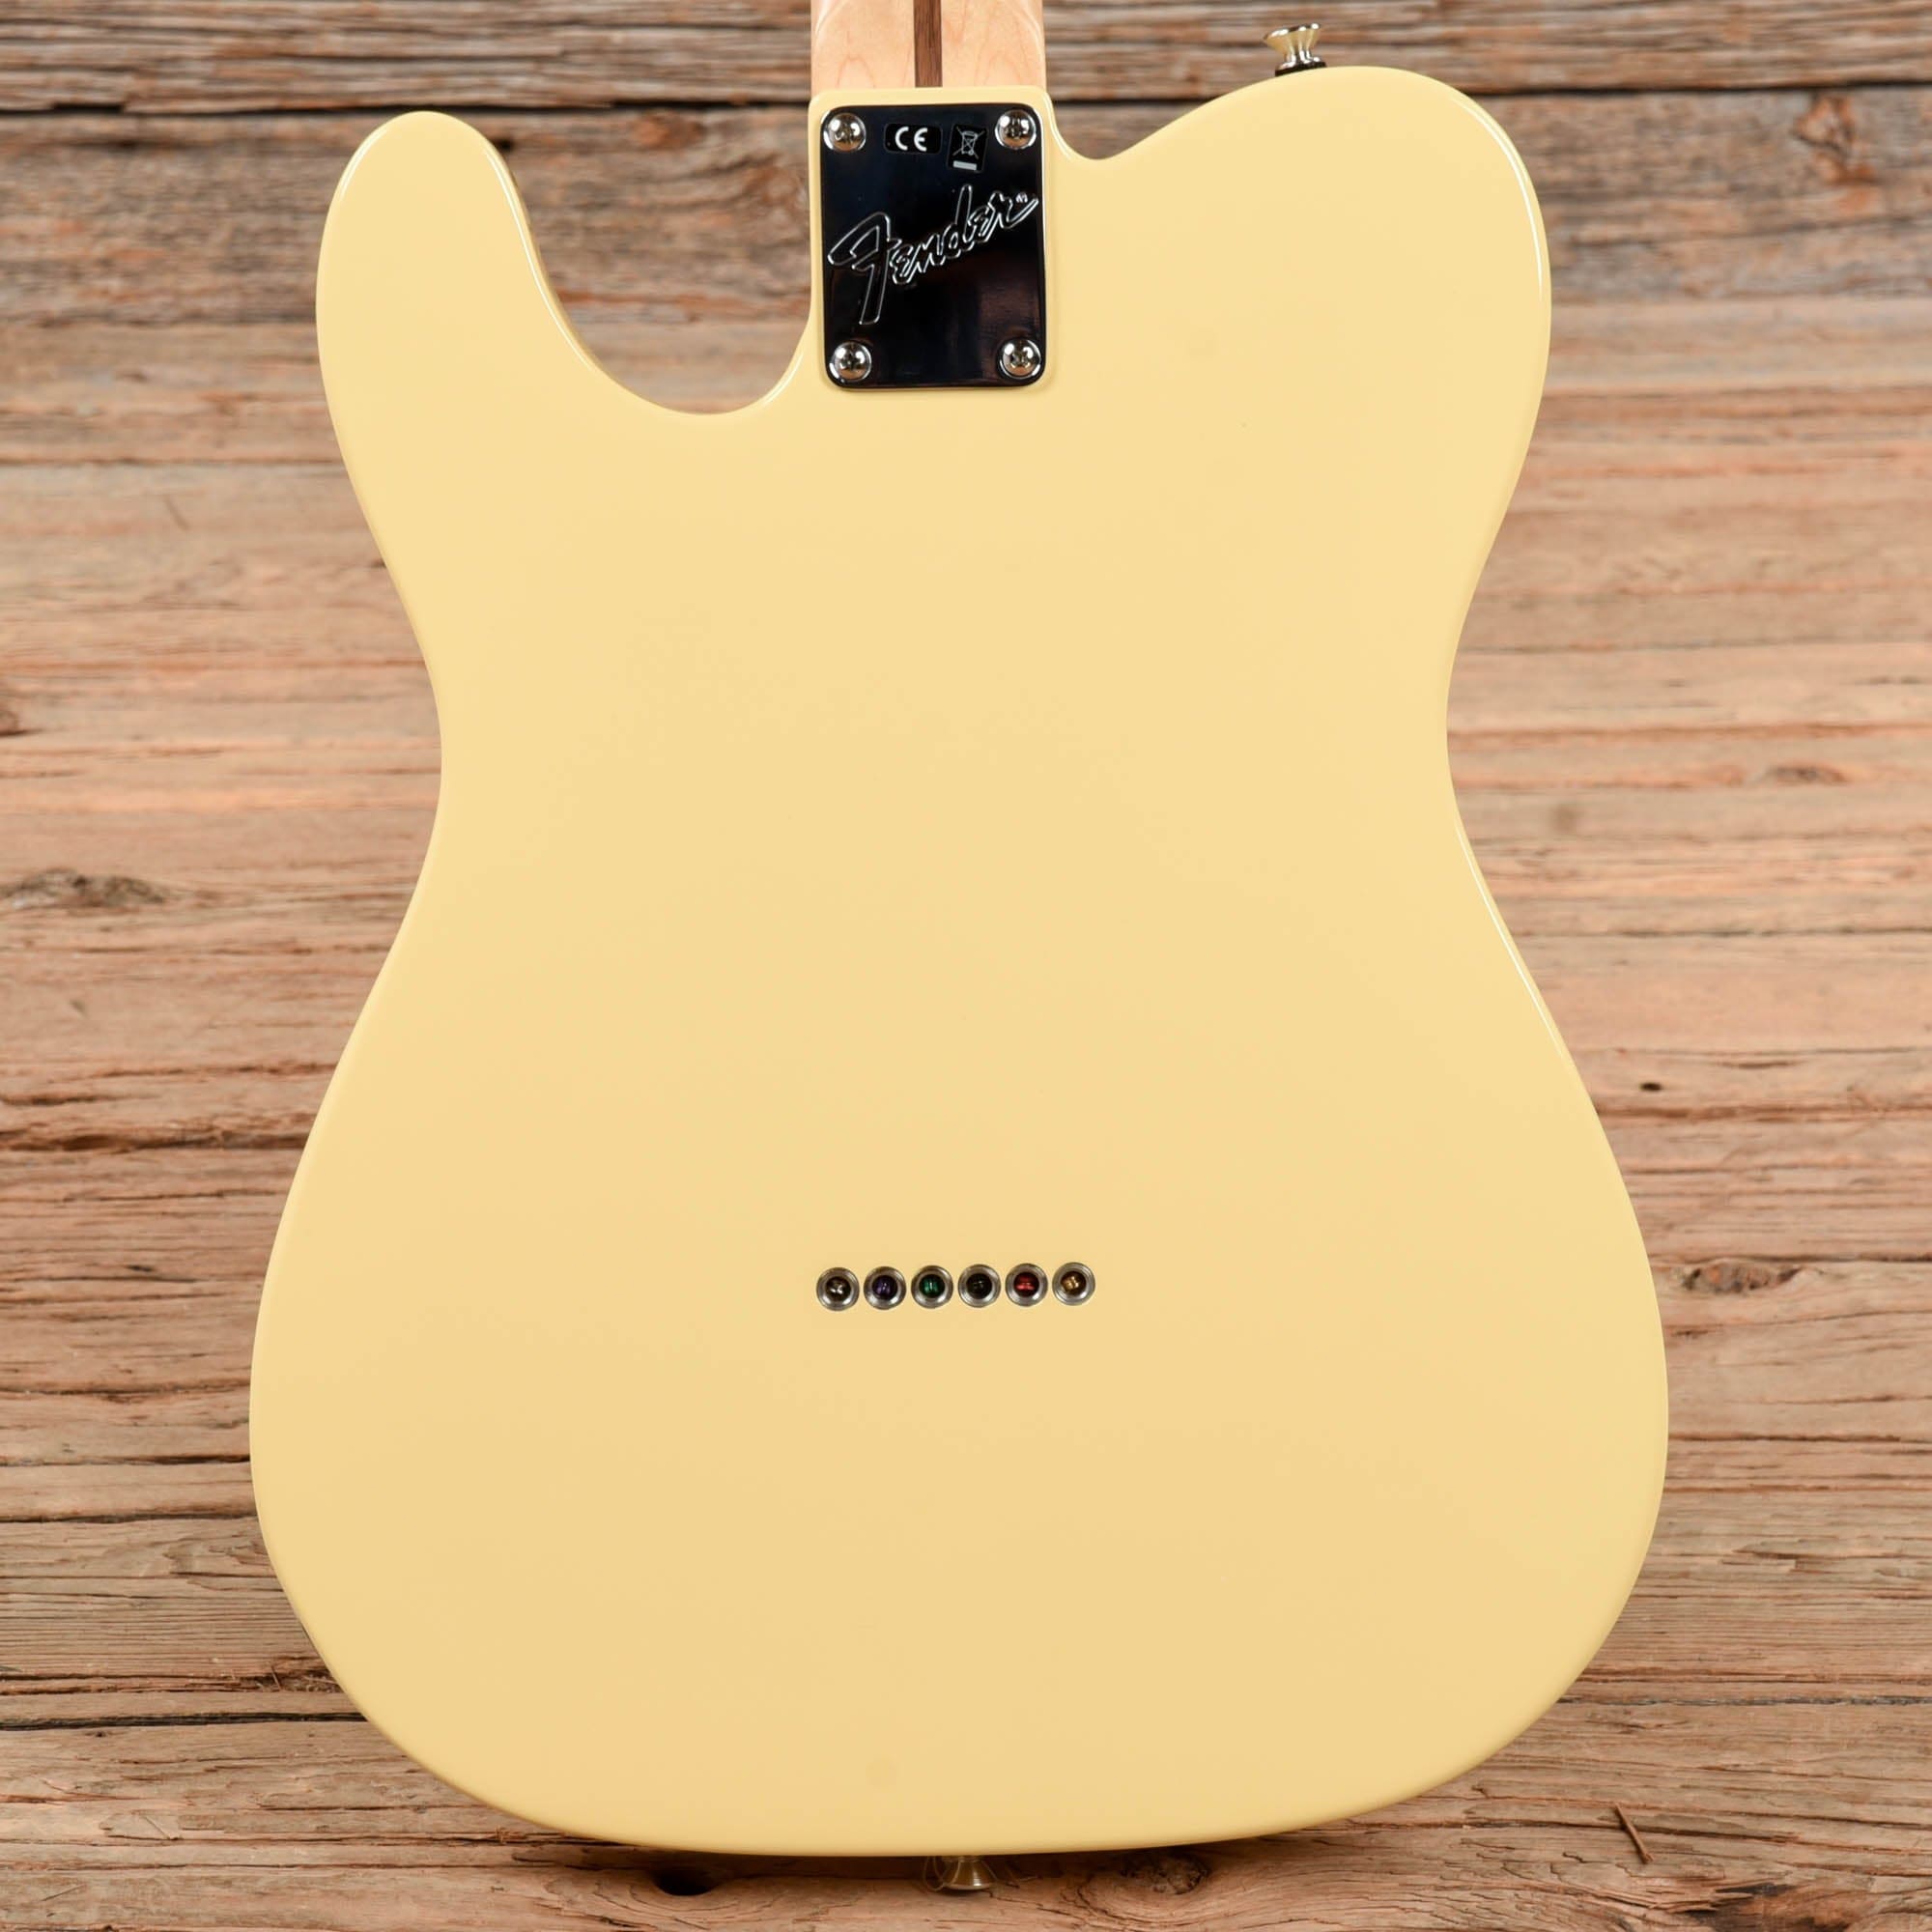 Fender American Performer Telecaster Hum Vintage White 2019 Electric Guitars / Solid Body